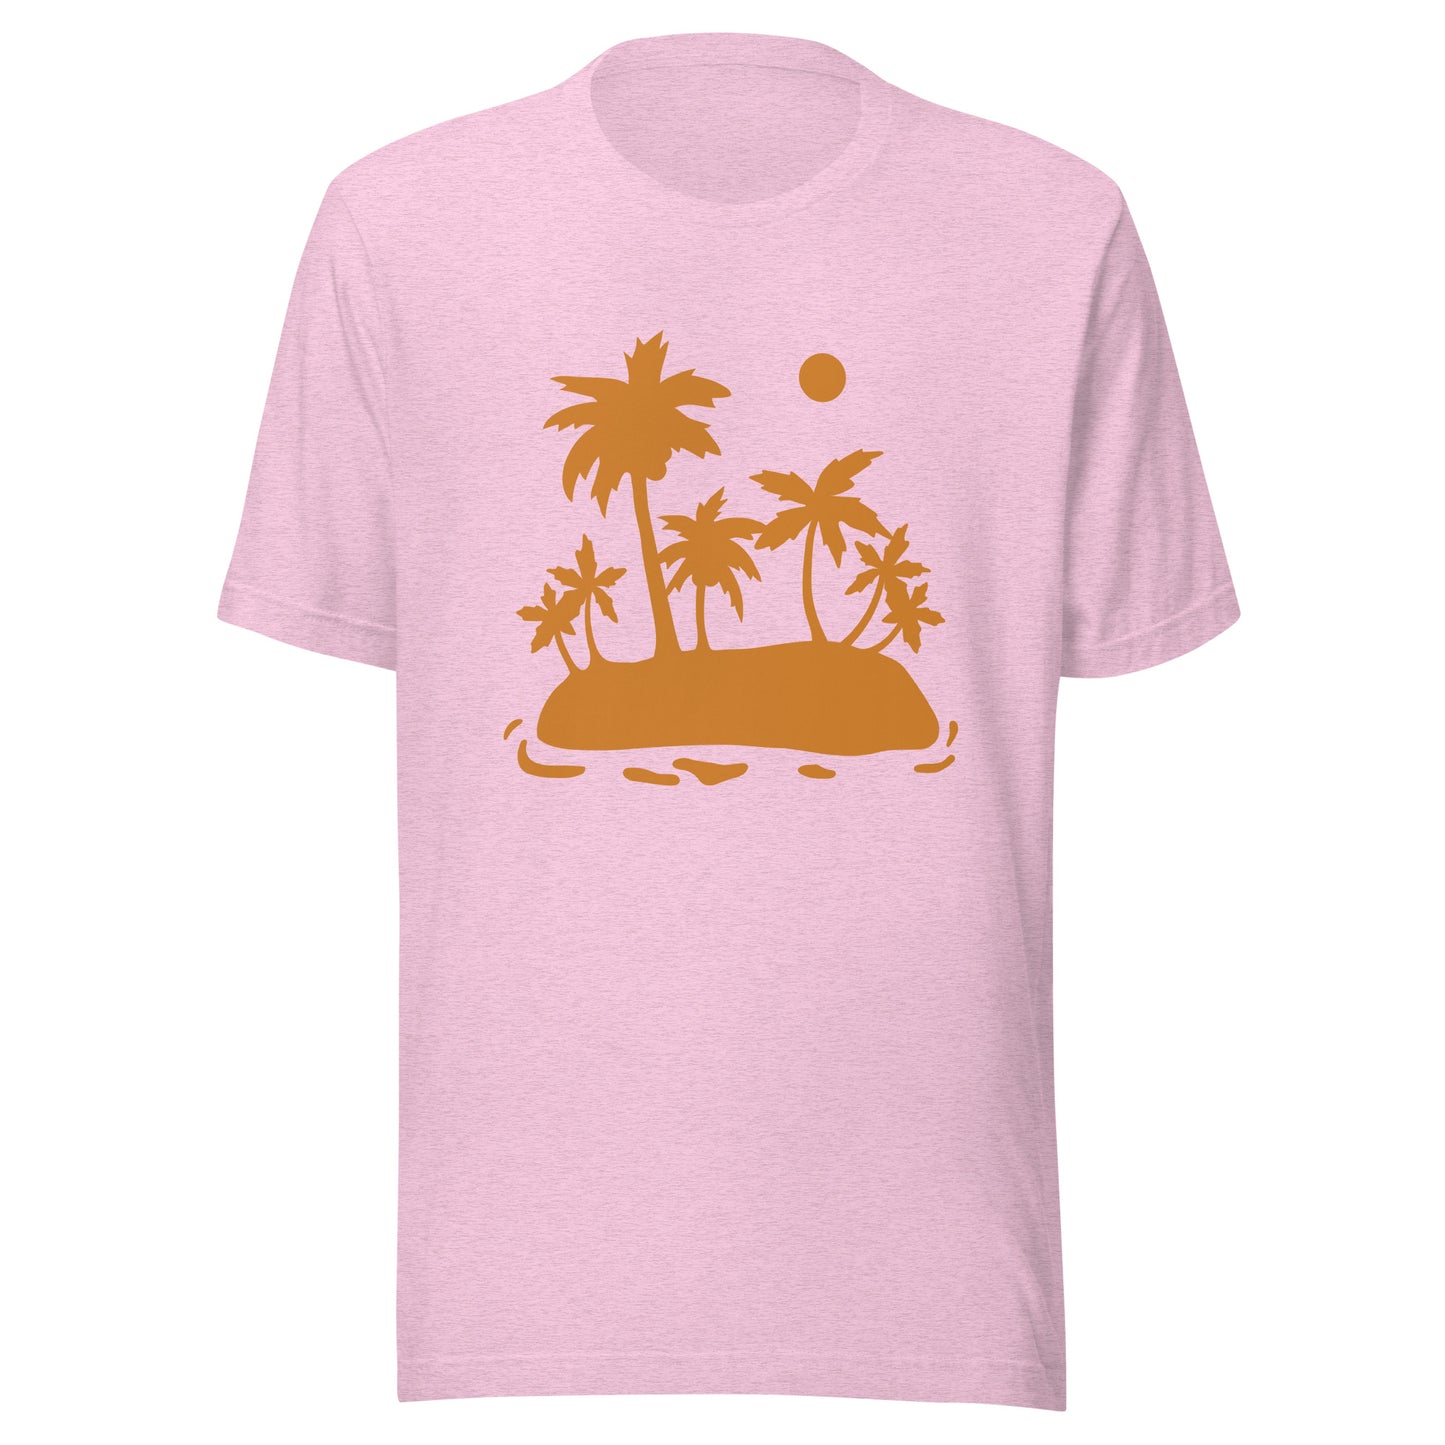 Palm Trees and Sun Unisex t-shirt, Shirt with Palm Trees and Sun, Vacation Summer Shirt for an Island